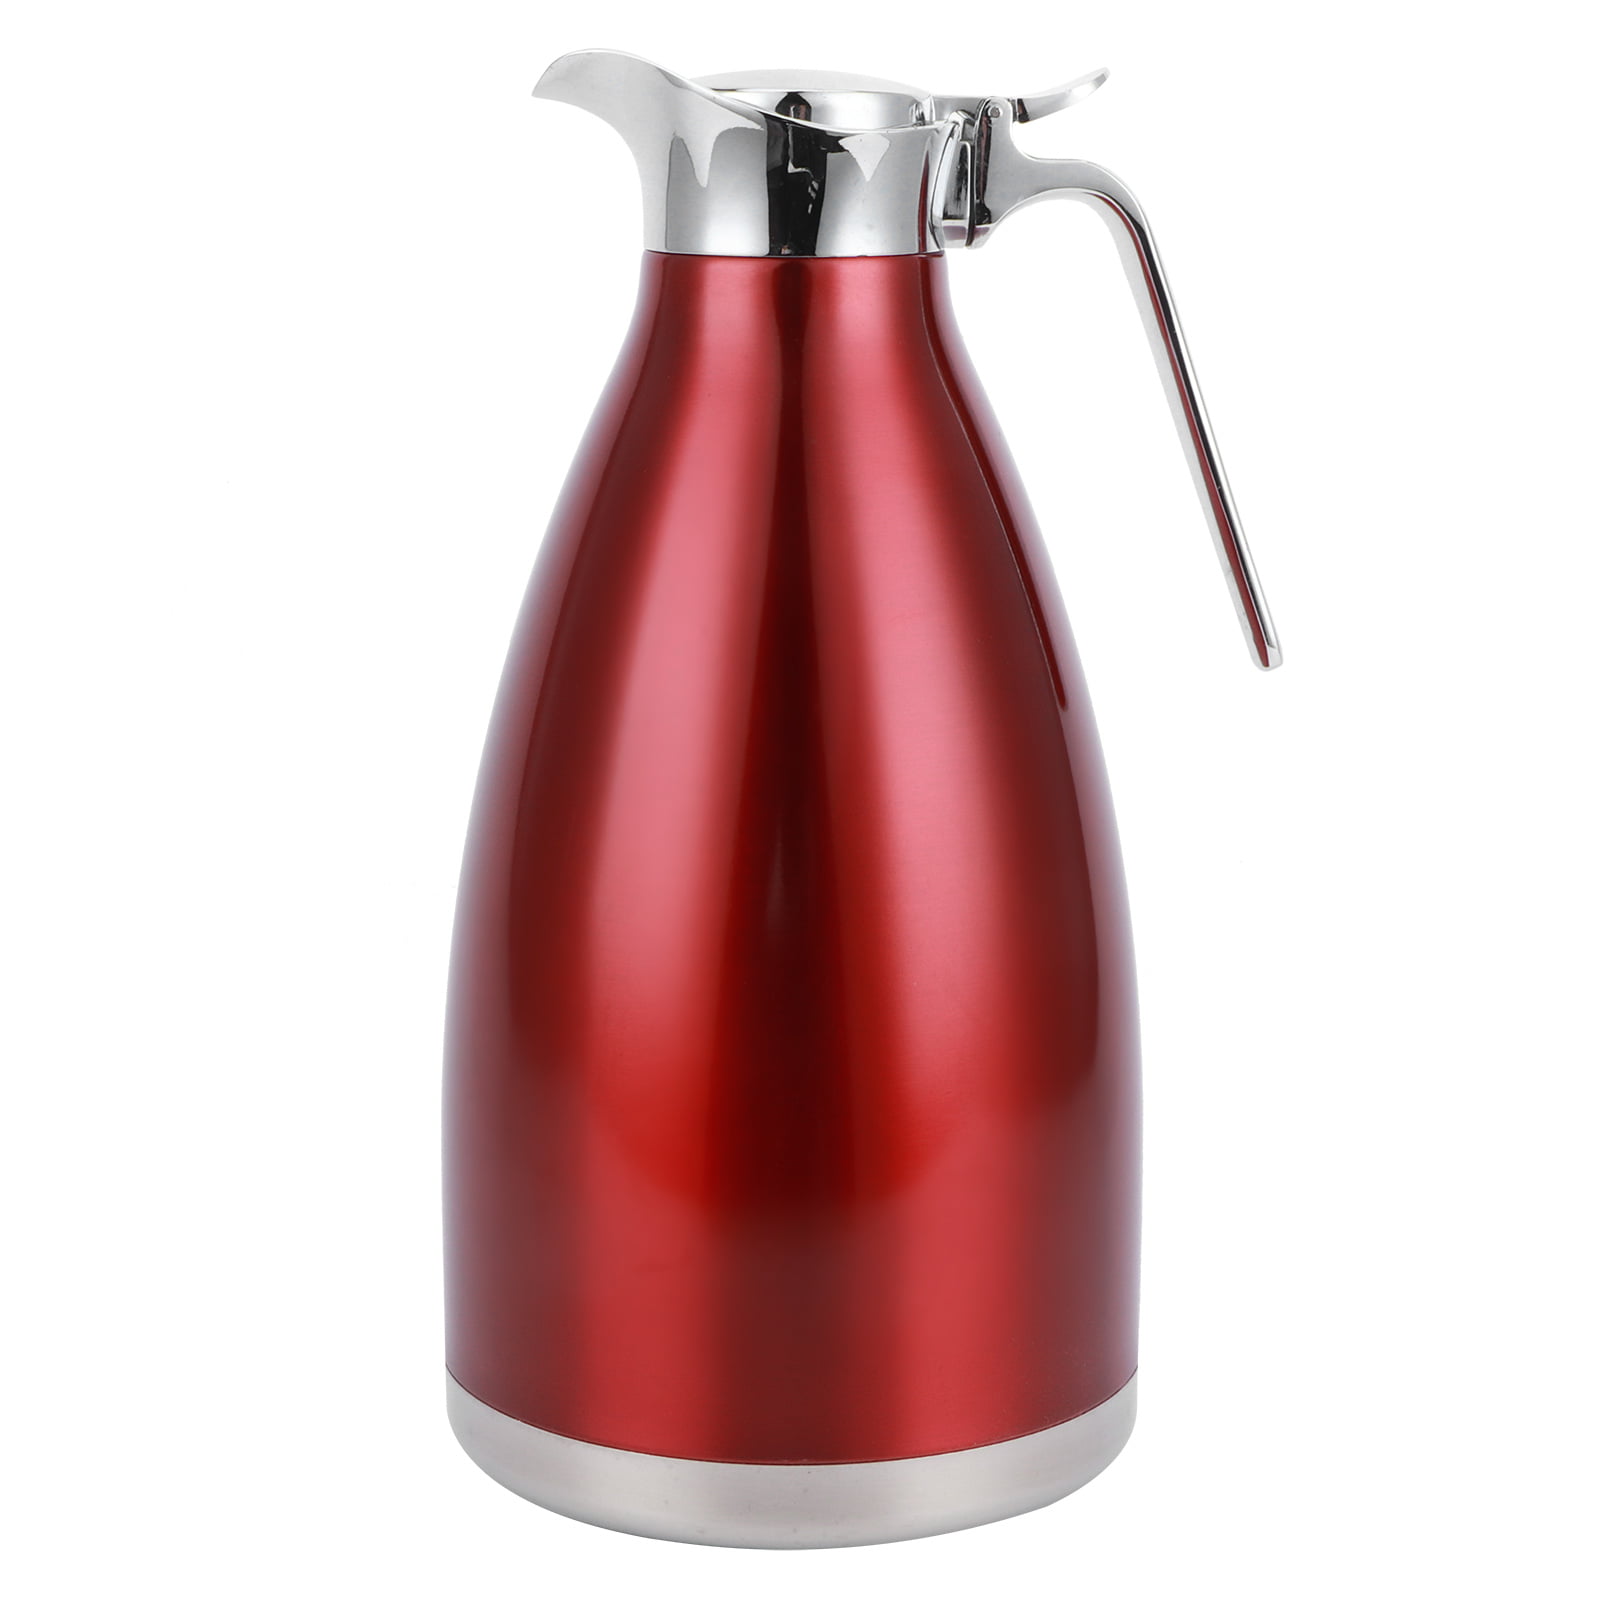 Vacuum Thermoes Jug 2L Stainless Steel Household Water Coffee Bottle Vacuum Insulated Thermo Jug Pot 